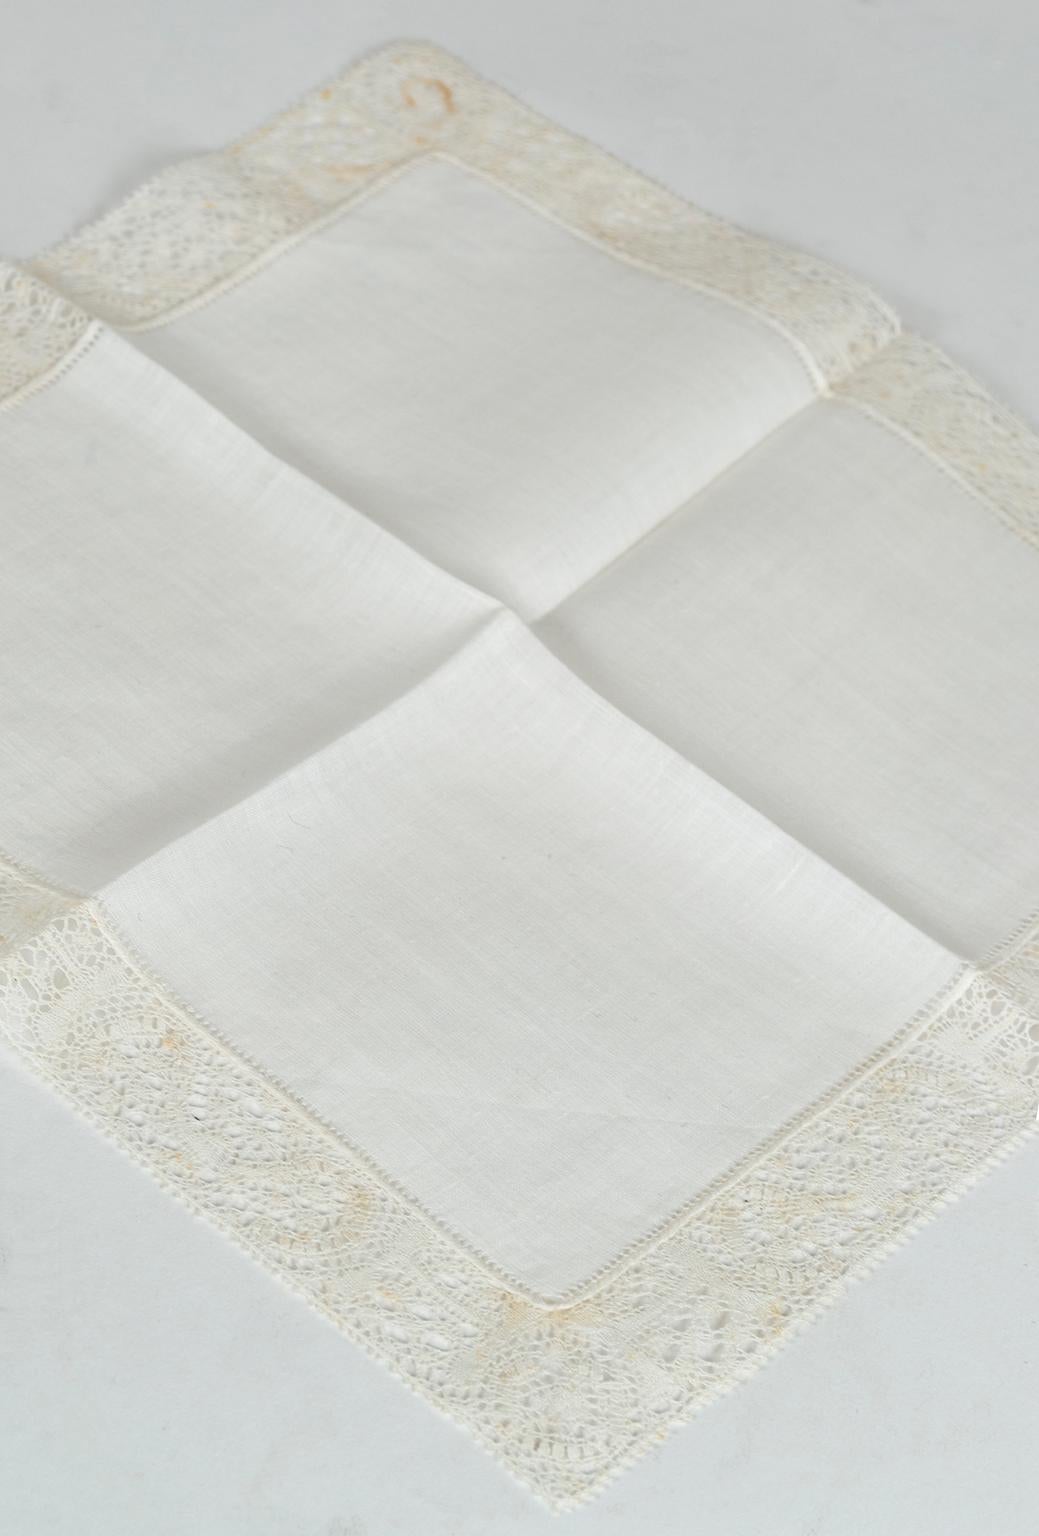 An affectionate memory of a bygone era, vintage handkerchiefs make heartfelt gifts appropriate for almost any occasion. This never-used example features a border of delicate handmade Belgian lace and remains as perfect as it was almost 70 years